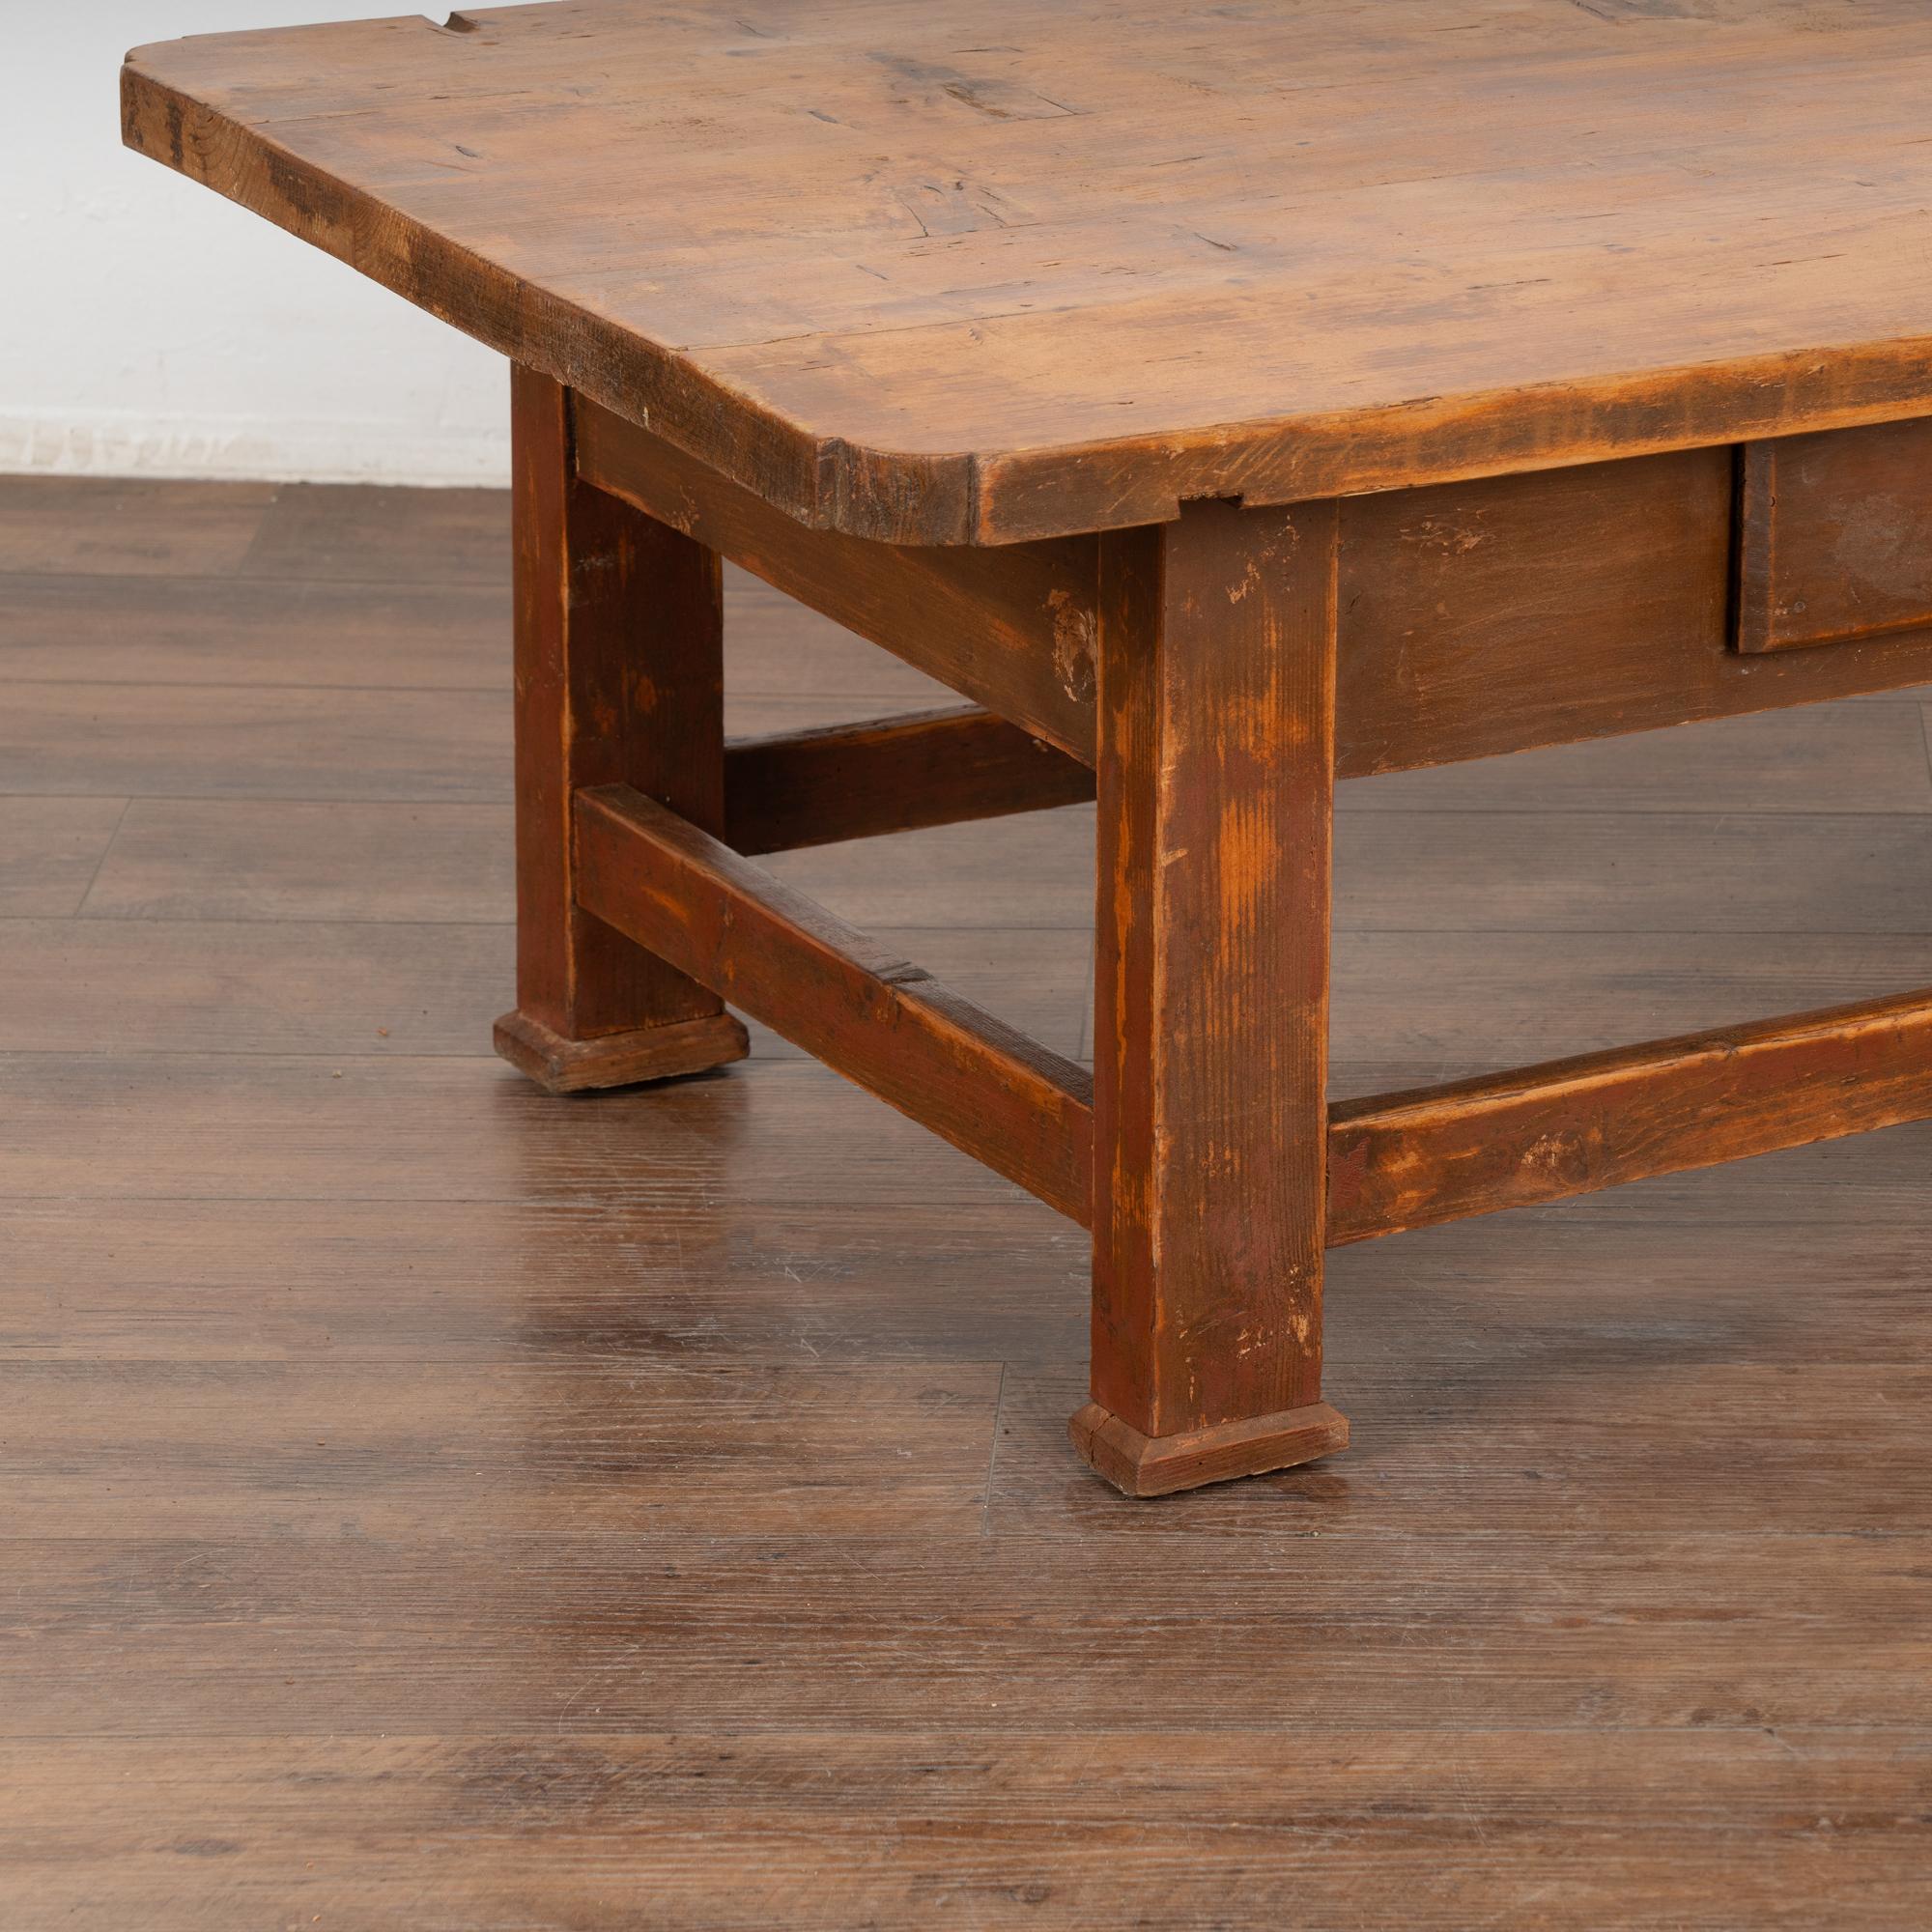 Hungarian Farmhouse Coffee Table With Drawer, Hungary circa 1890 For Sale